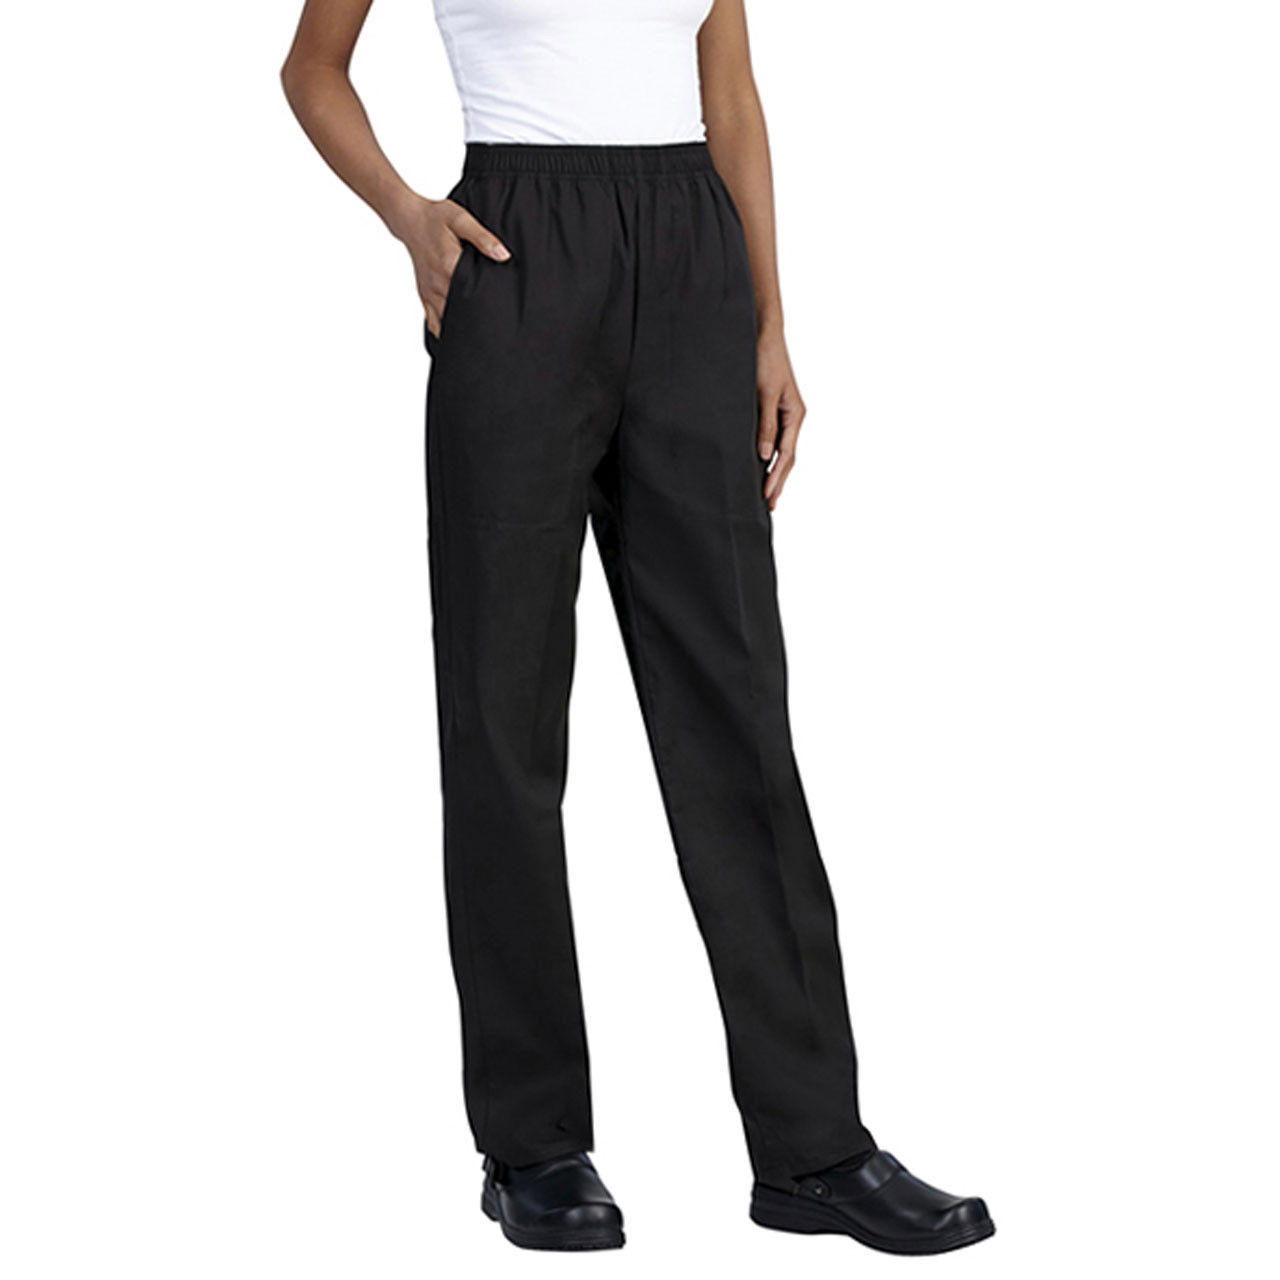 Do these scrub pants feature any pockets?